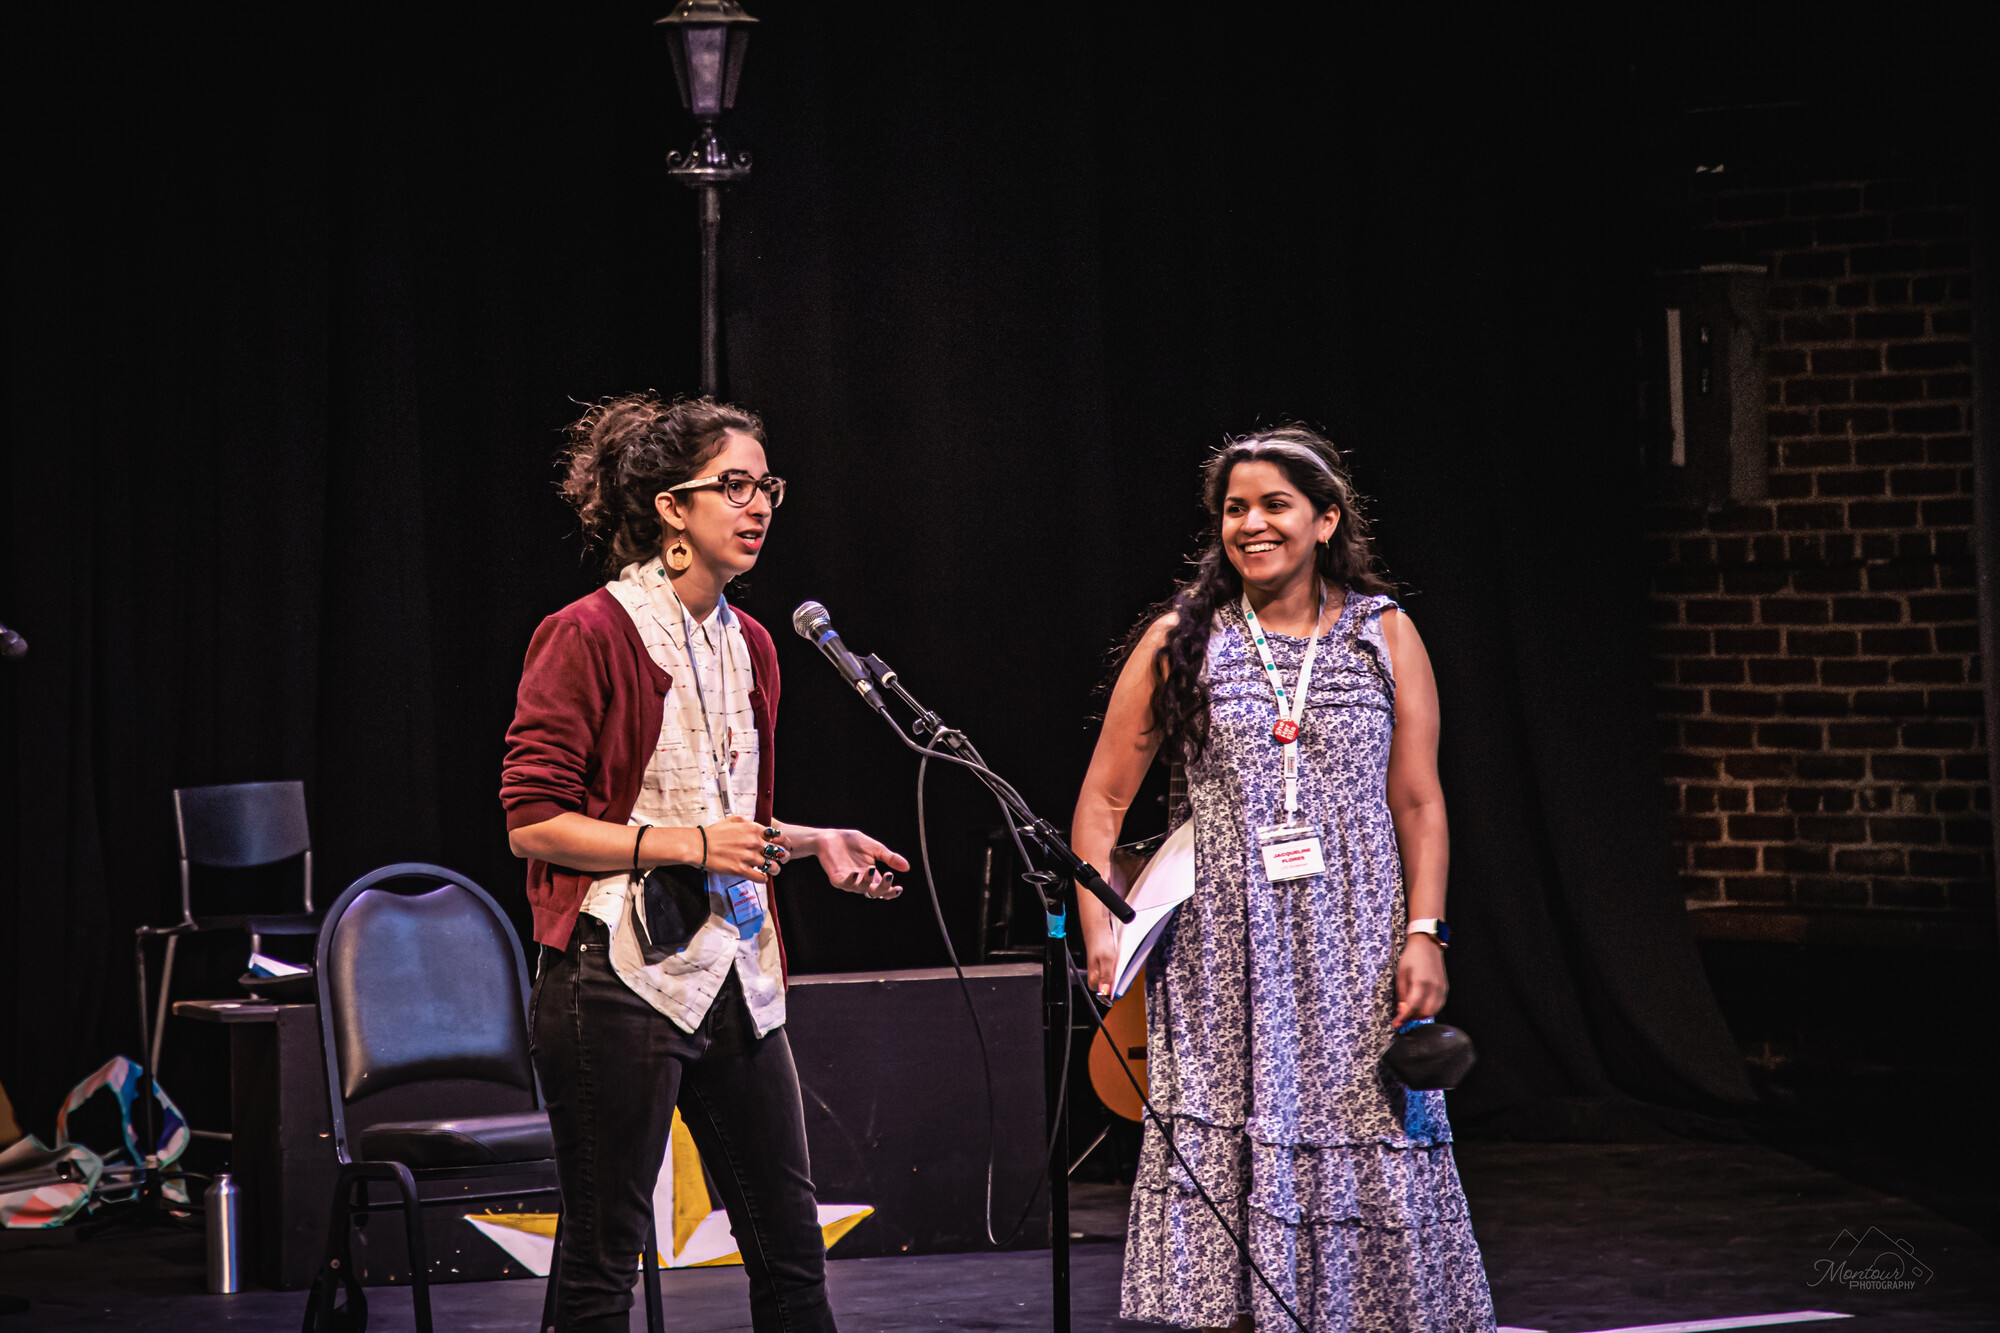 One woman speaks into a microphone and another woman stands next to her and smiles.